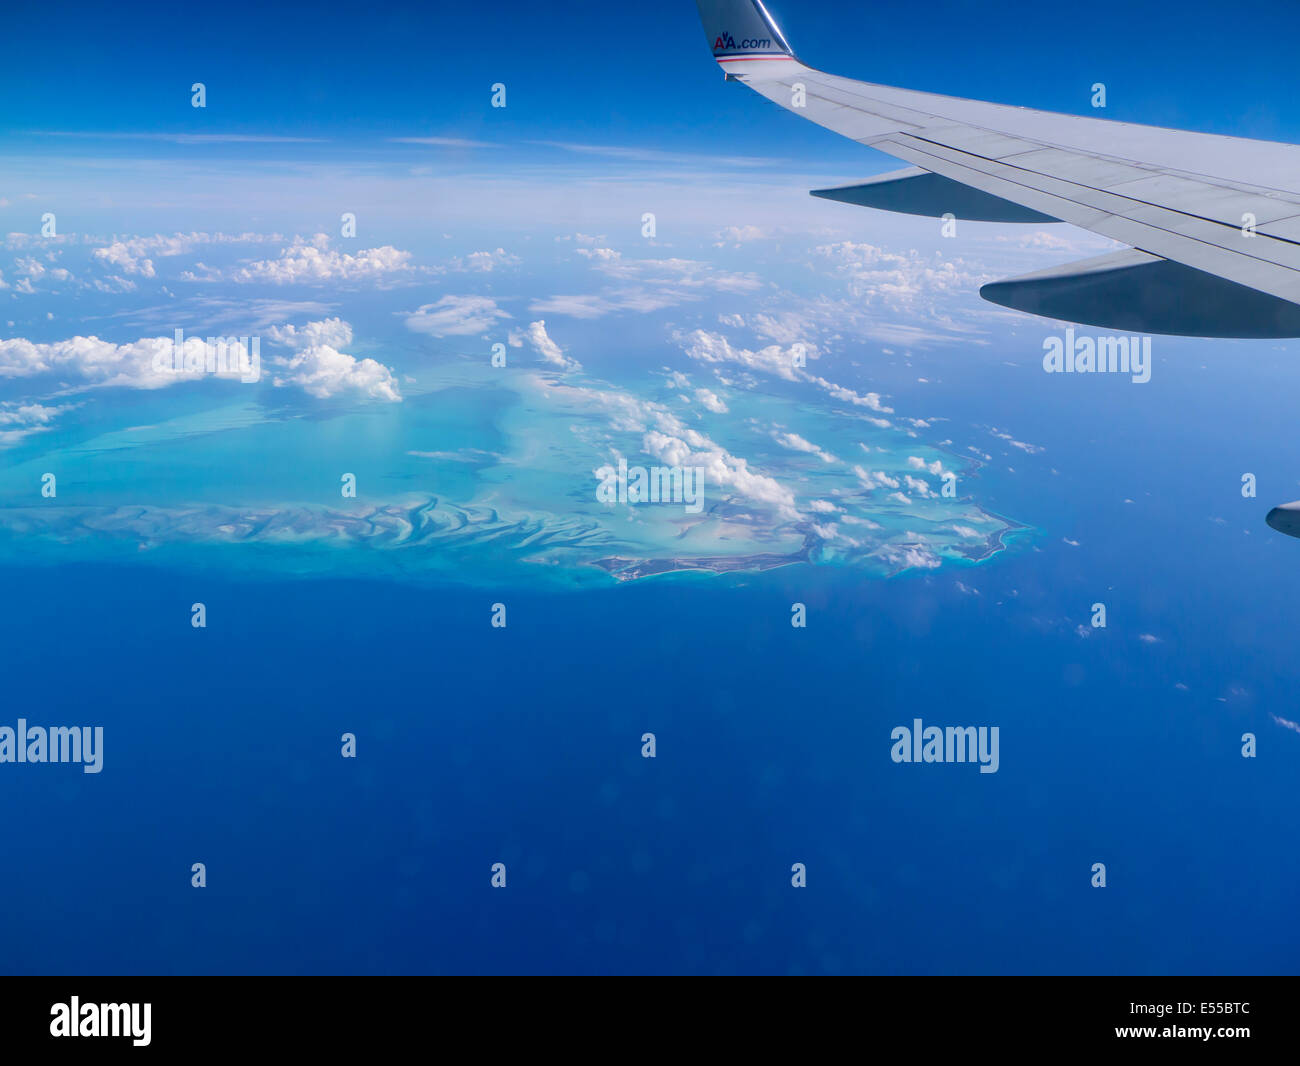 Abstract aerial view of Caribbean Sea with airplane wing in frame Stock Photo